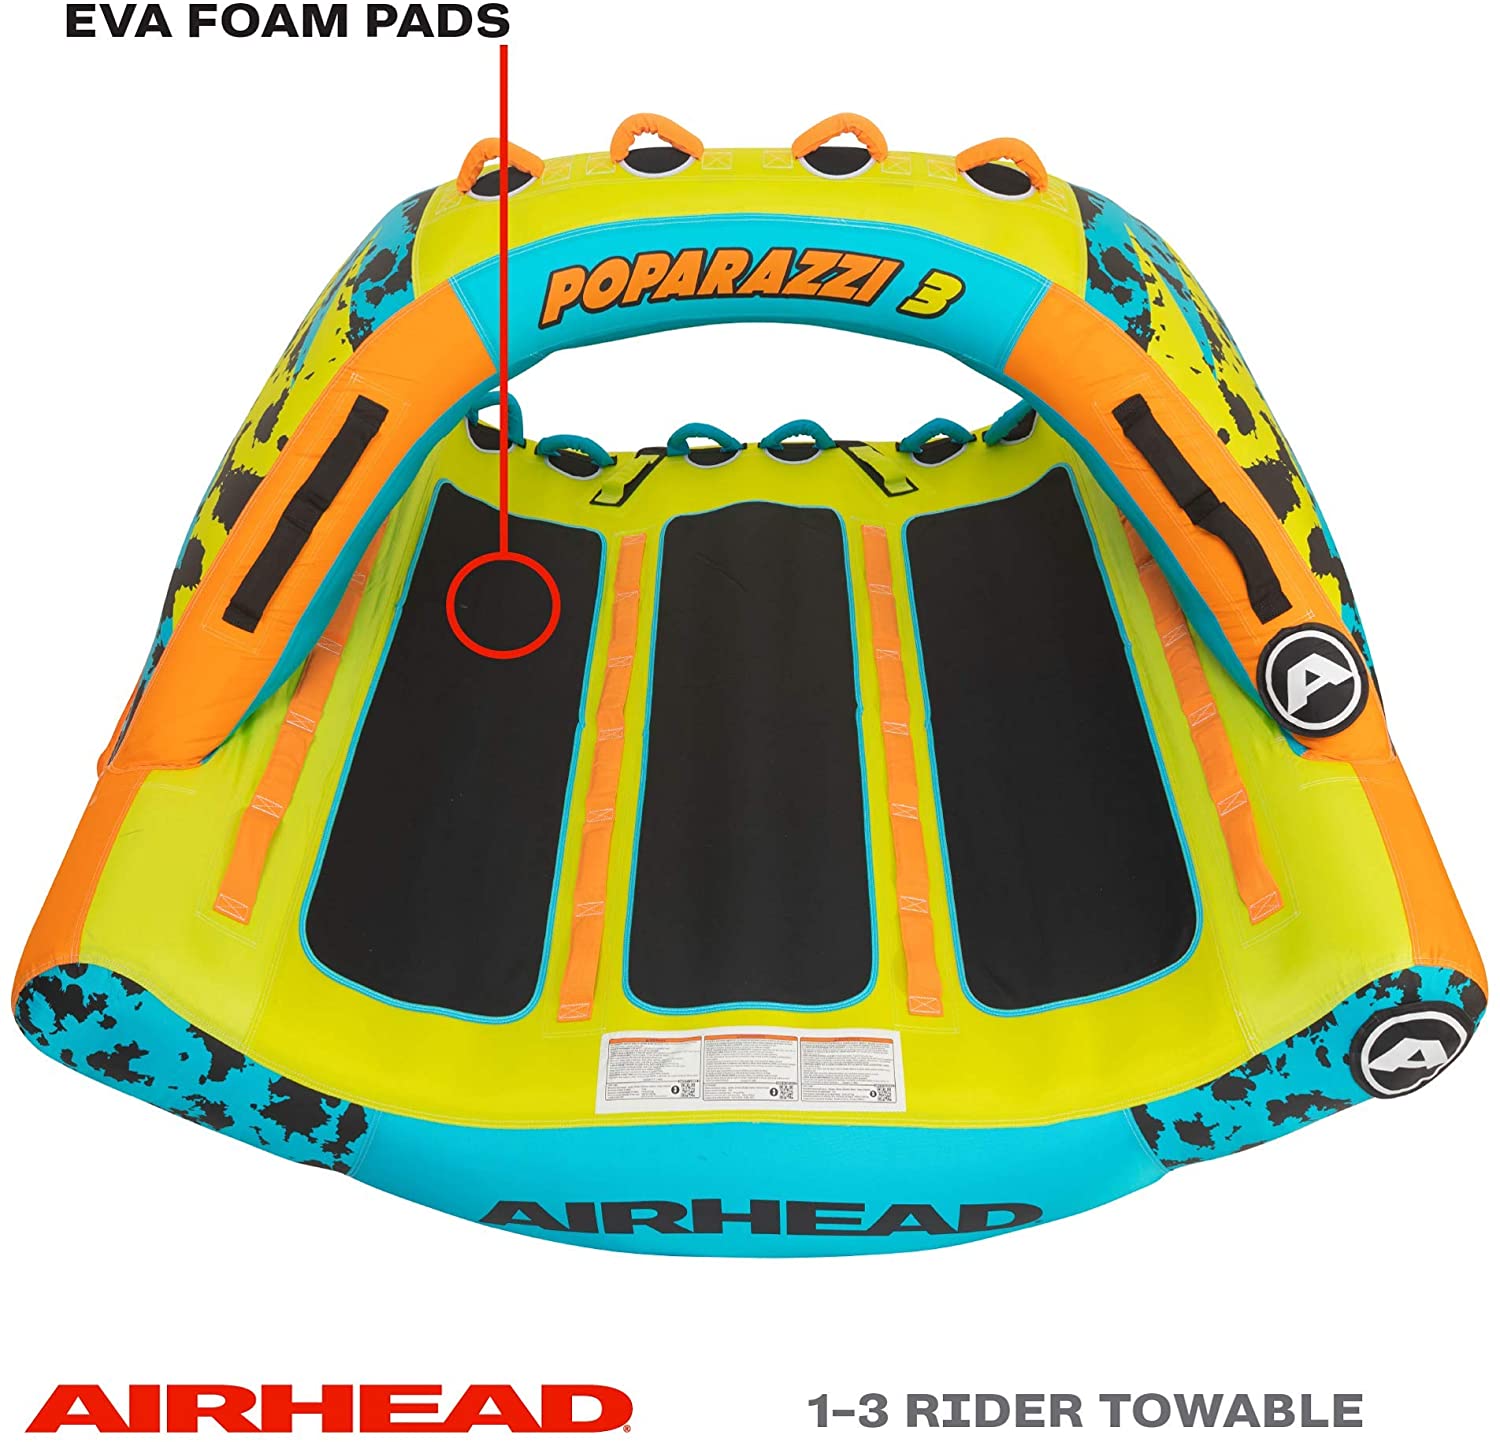 Airhead AHPZ-1750 Poparazzi 3 Person Inflatable Towable Water Lake Boating Tube - image 5 of 7